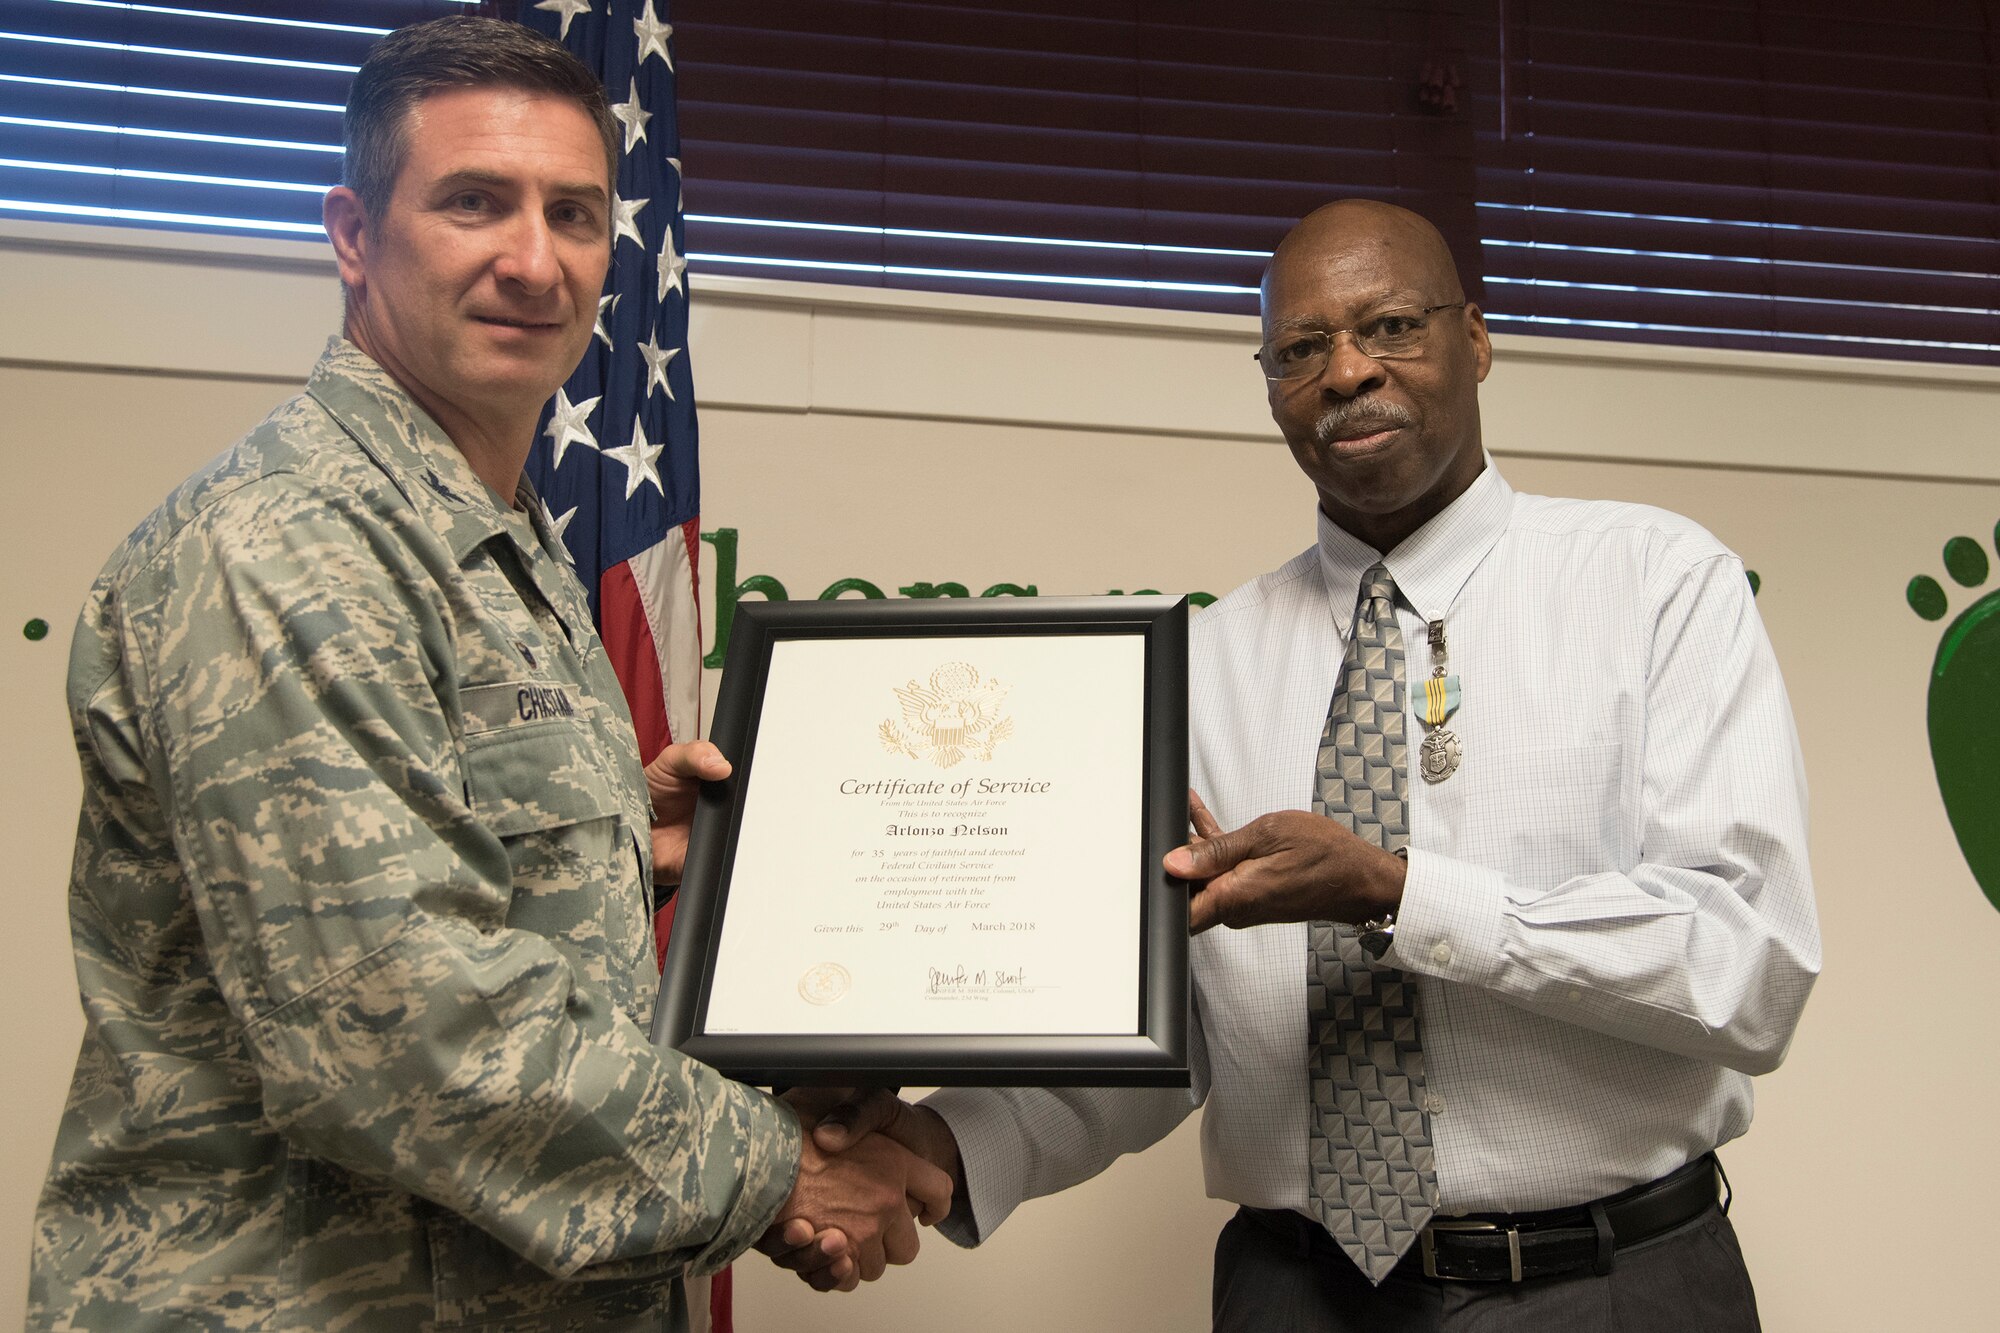 Col. John Chastain, left, 23d Maintenance Group (MXG) commander and Arlonzo Nelson, 23d MXG computer assistant, pose for a photo, during a retirement ceremony March 29, 2018, at Moody Air Force Base, Ga. Nelson is retiring after 30 years of civilian service here. (U.S. Air Force photo by Airman Eugene Oliver)